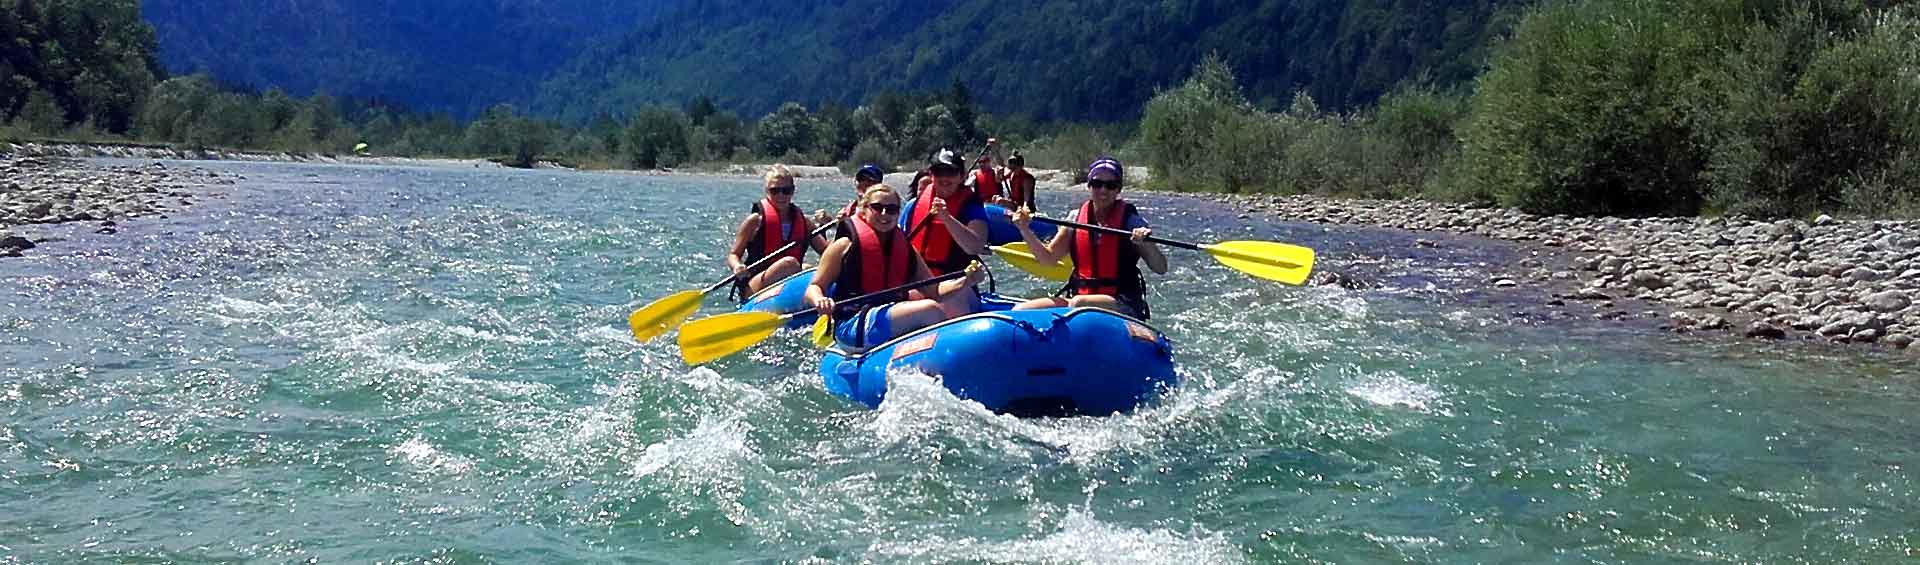 Mini Rafting Schlauchboot Isar Lenggries ab Sylvensteinsee bei Fall